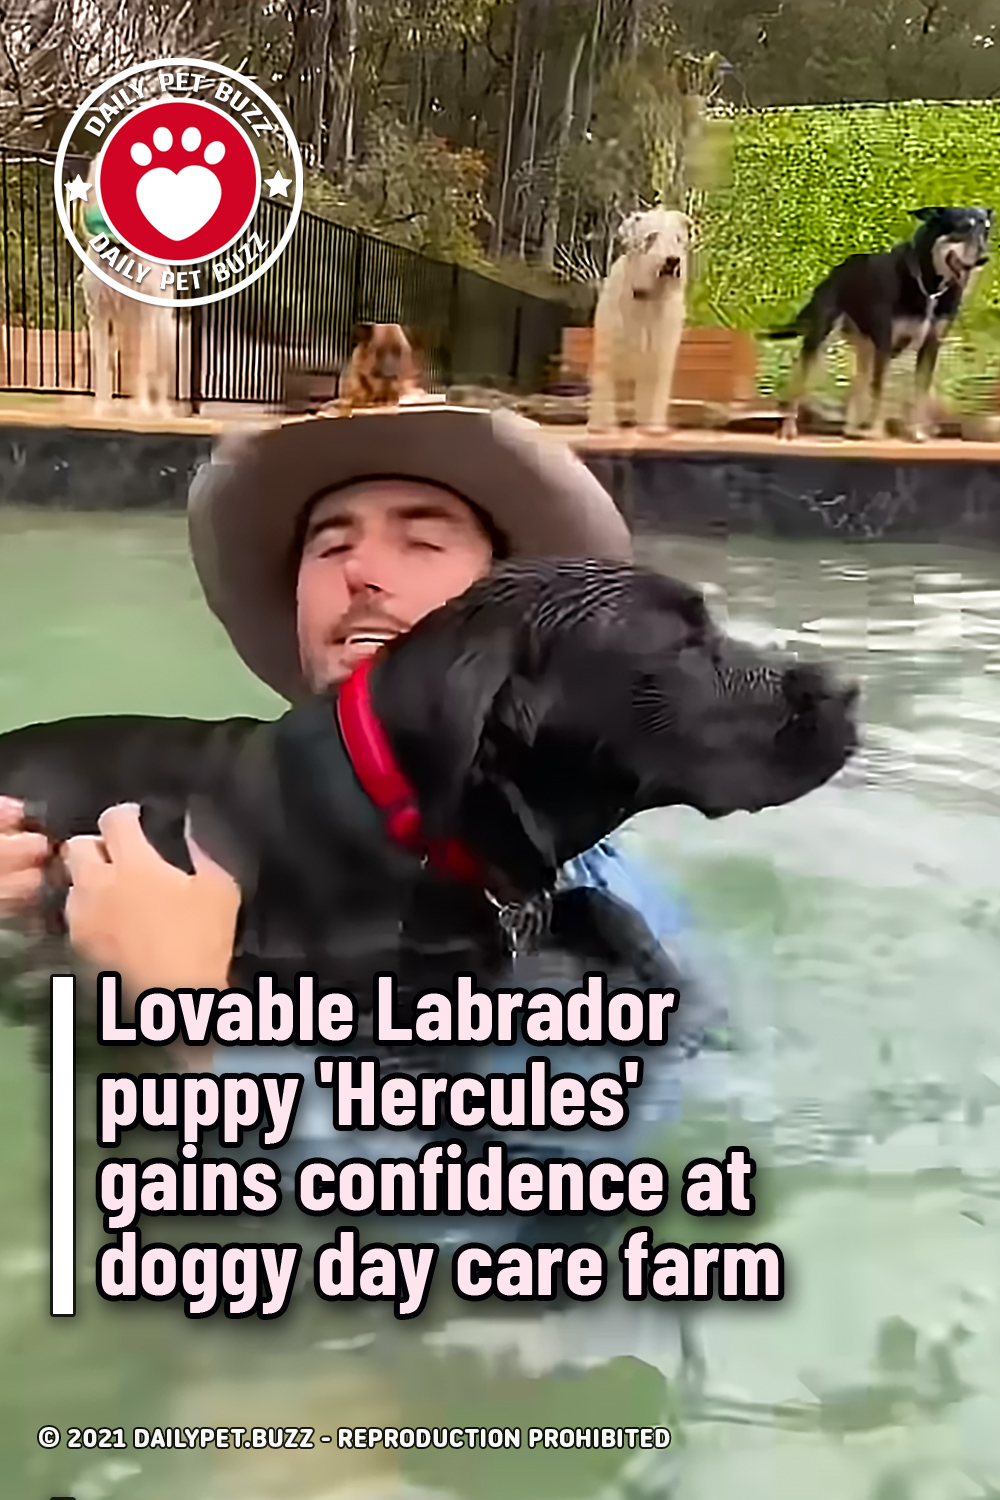 Lovable Labrador puppy \'Hercules\' gains confidence at doggy day care farm